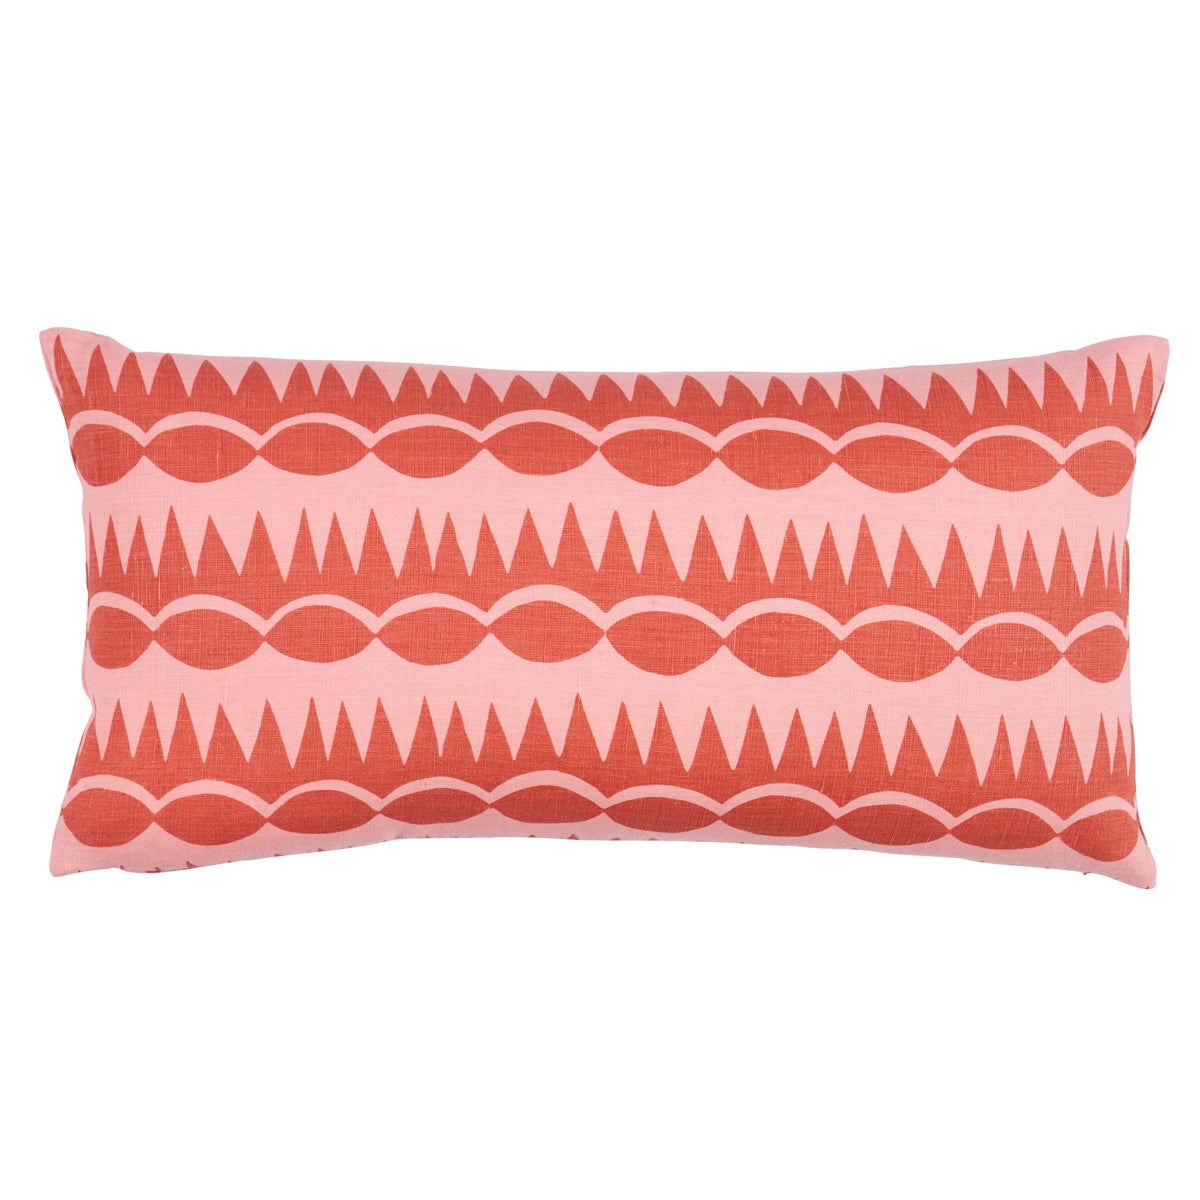 Dagger Stripe Pillow in Red on Pink, 24x12"